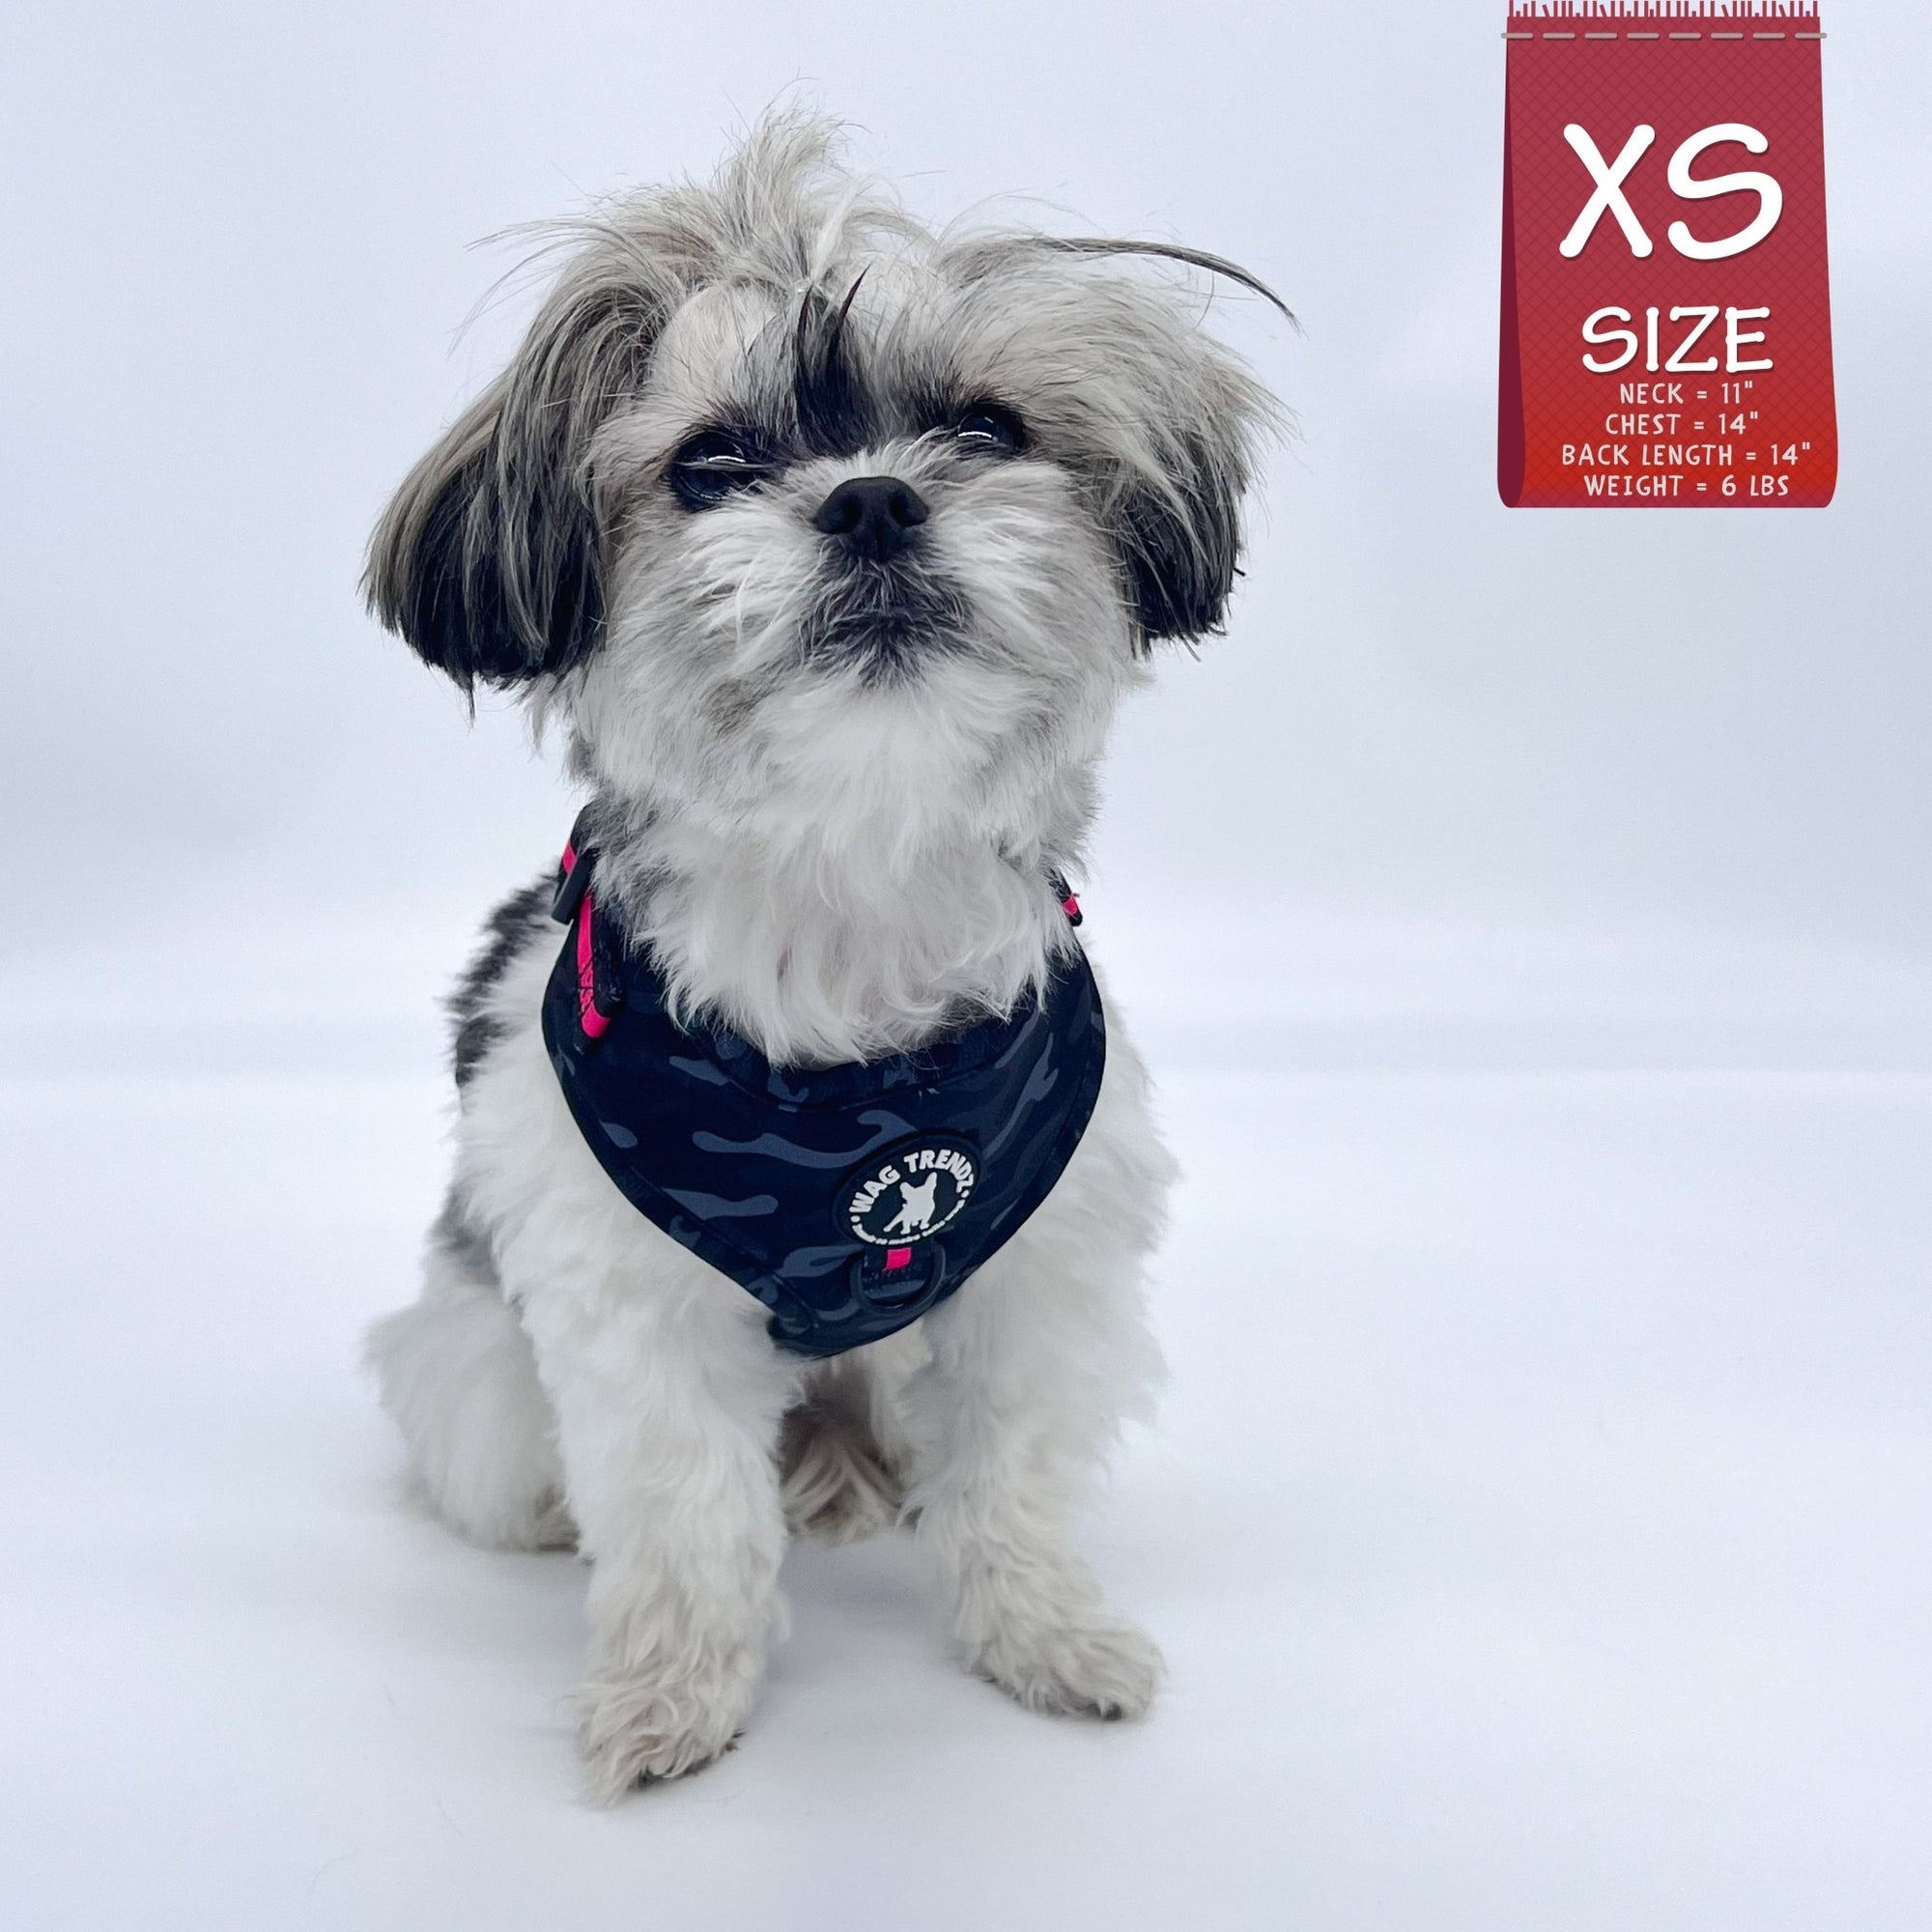 Dog Collar Harness and Leash Set - Shih Tzu mix wearing XS Dog Adjustable Harness in black &amp; gray camo with hot pink accents - against solid white background - Wag Trendz